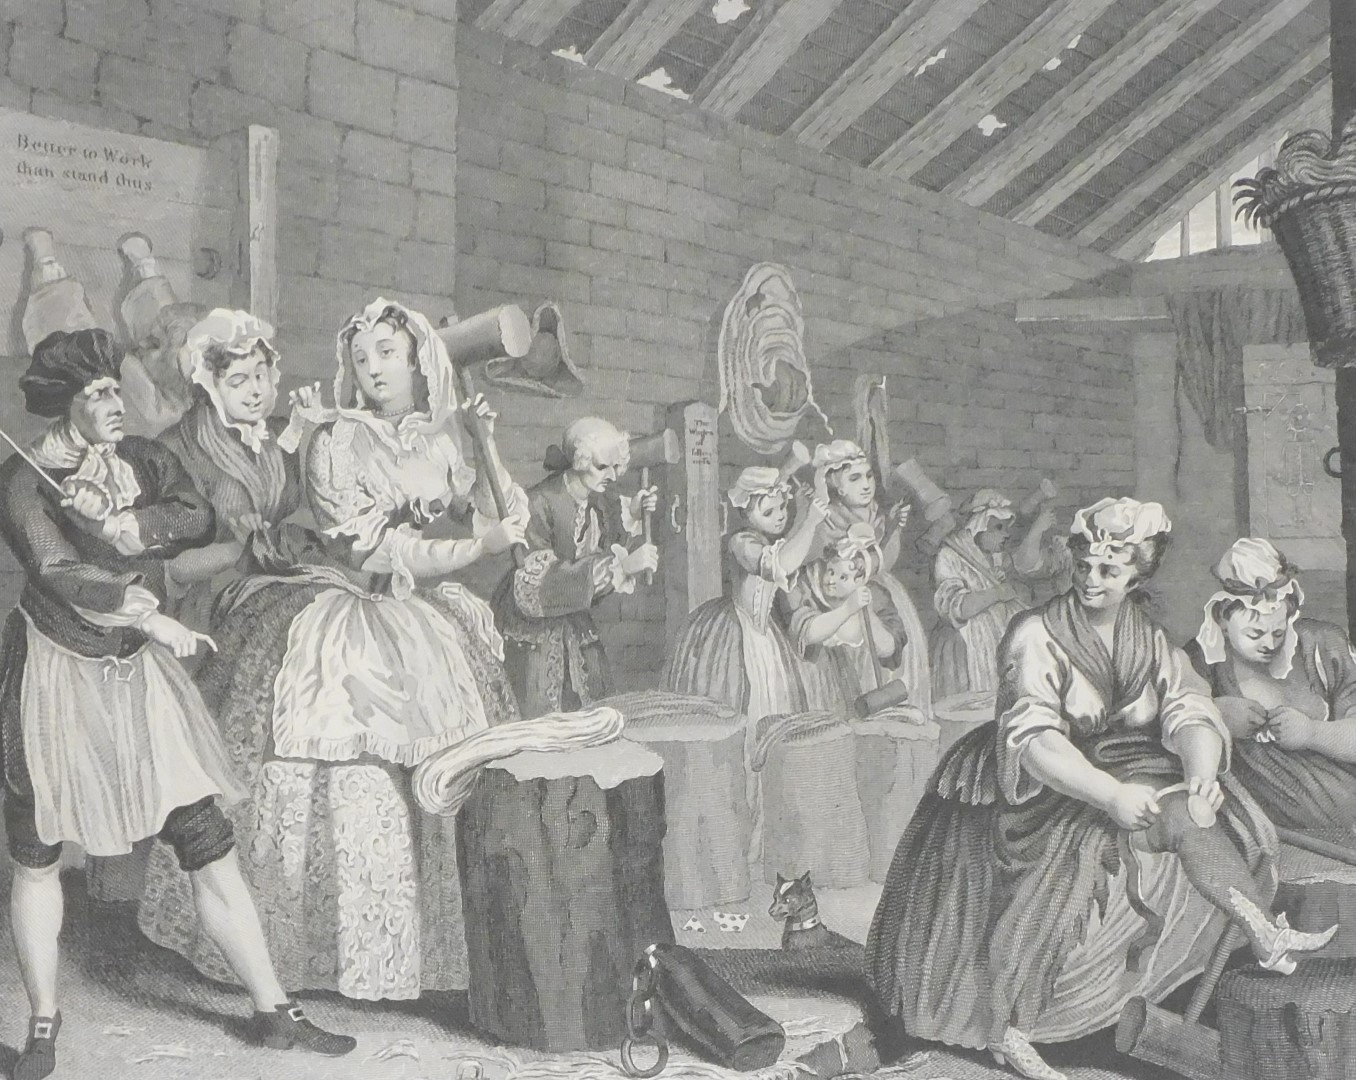 After William Hogarth (English, 1697-1764) A Harlots Progress, engravings, plates one to six, publis - Image 5 of 7